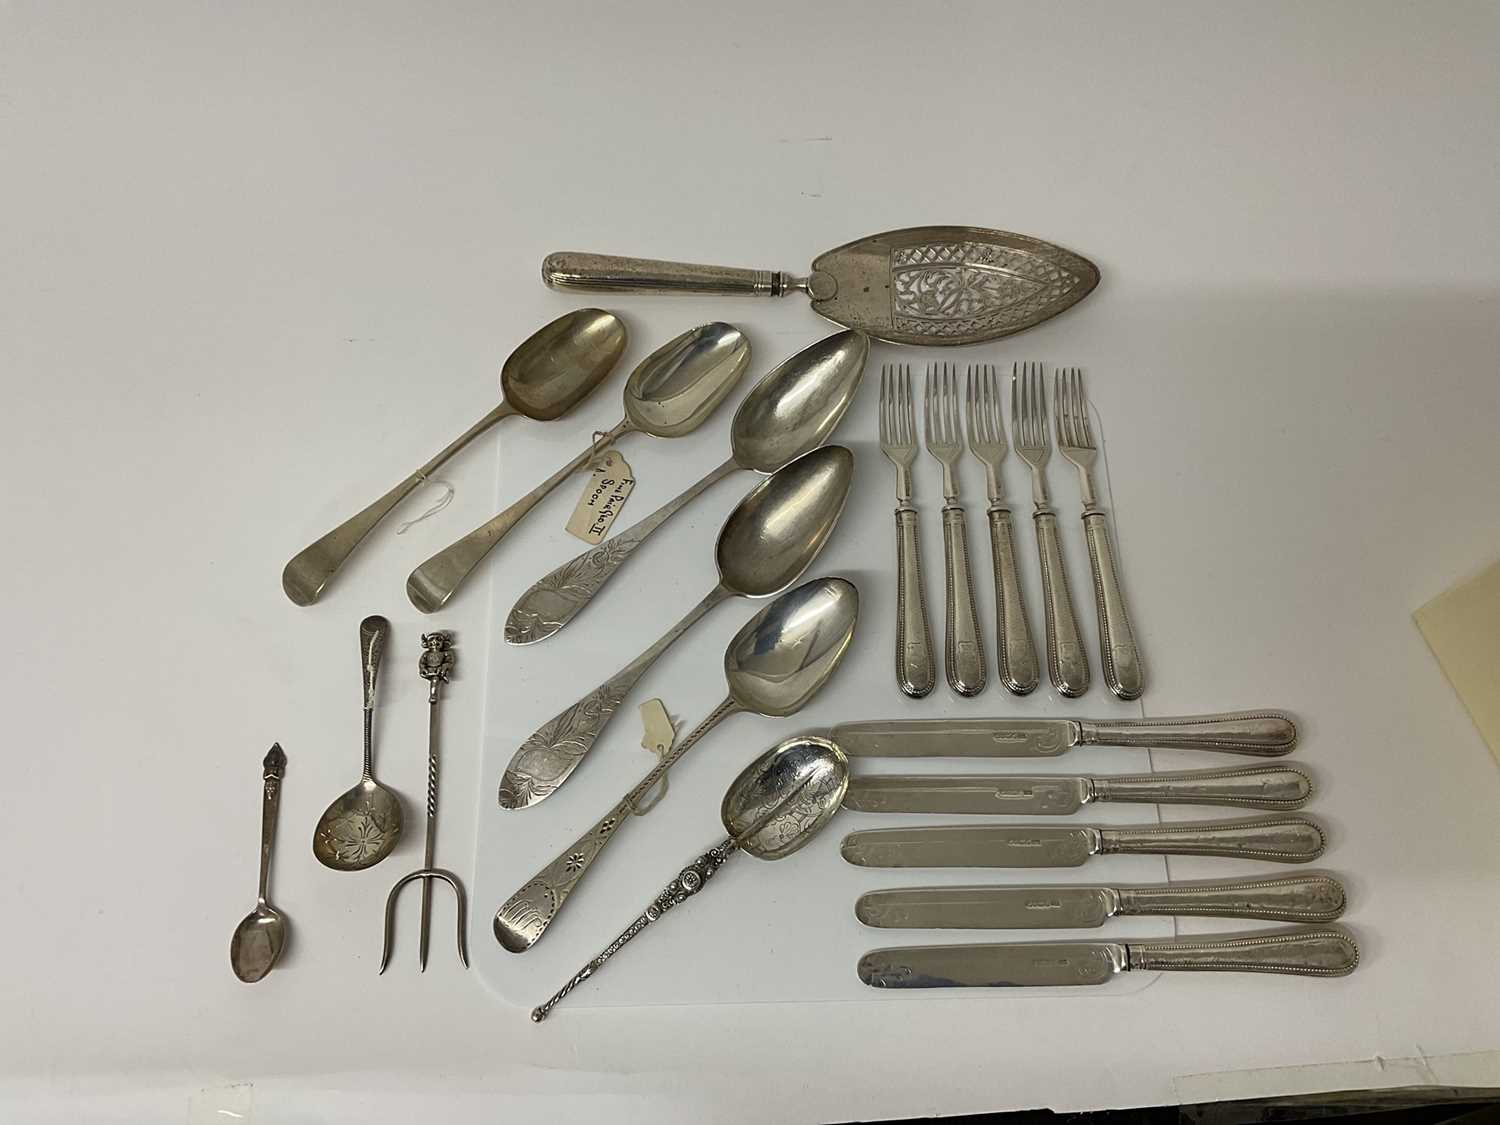 Lot 55 - Group of Georgian and later silver flatware, to include a pierced fish slice (London 1791), table spoons, toasting fork, desert cutlery and other items (various dates and makers).